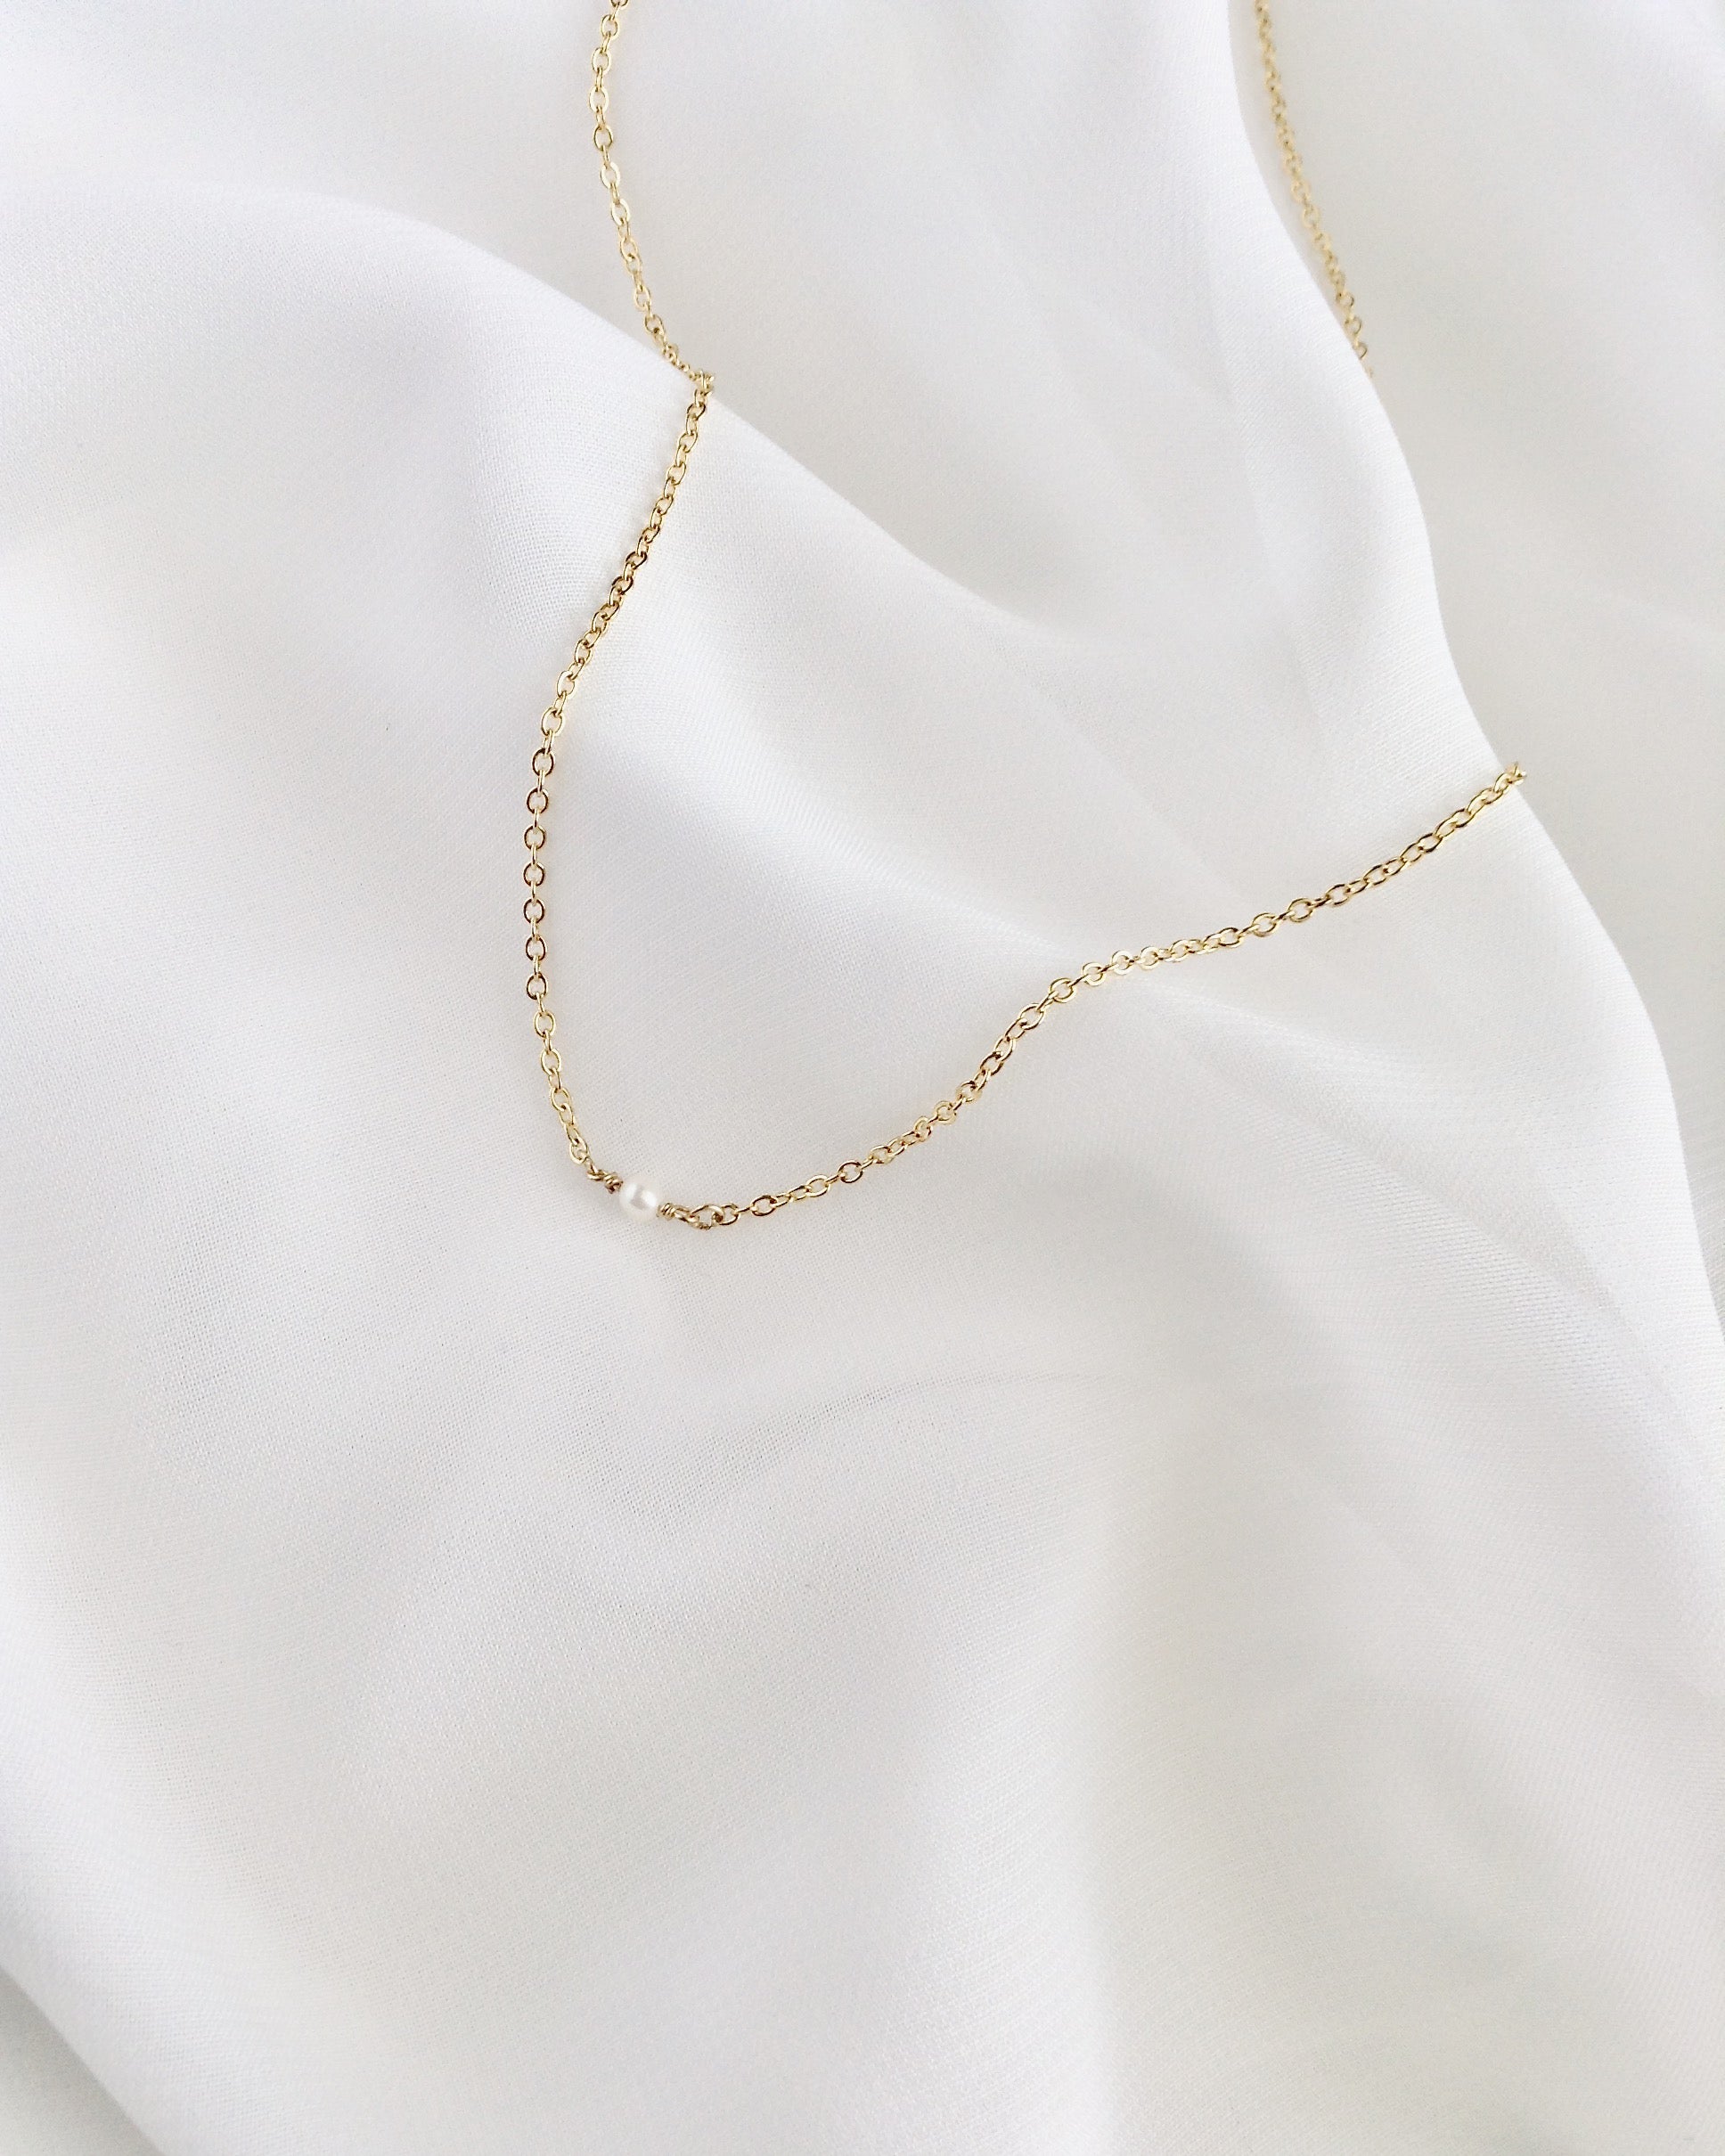 Simple Tiny Freshwater Pearl Necklace | Dainty Pearl Necklace | IB Jewelry